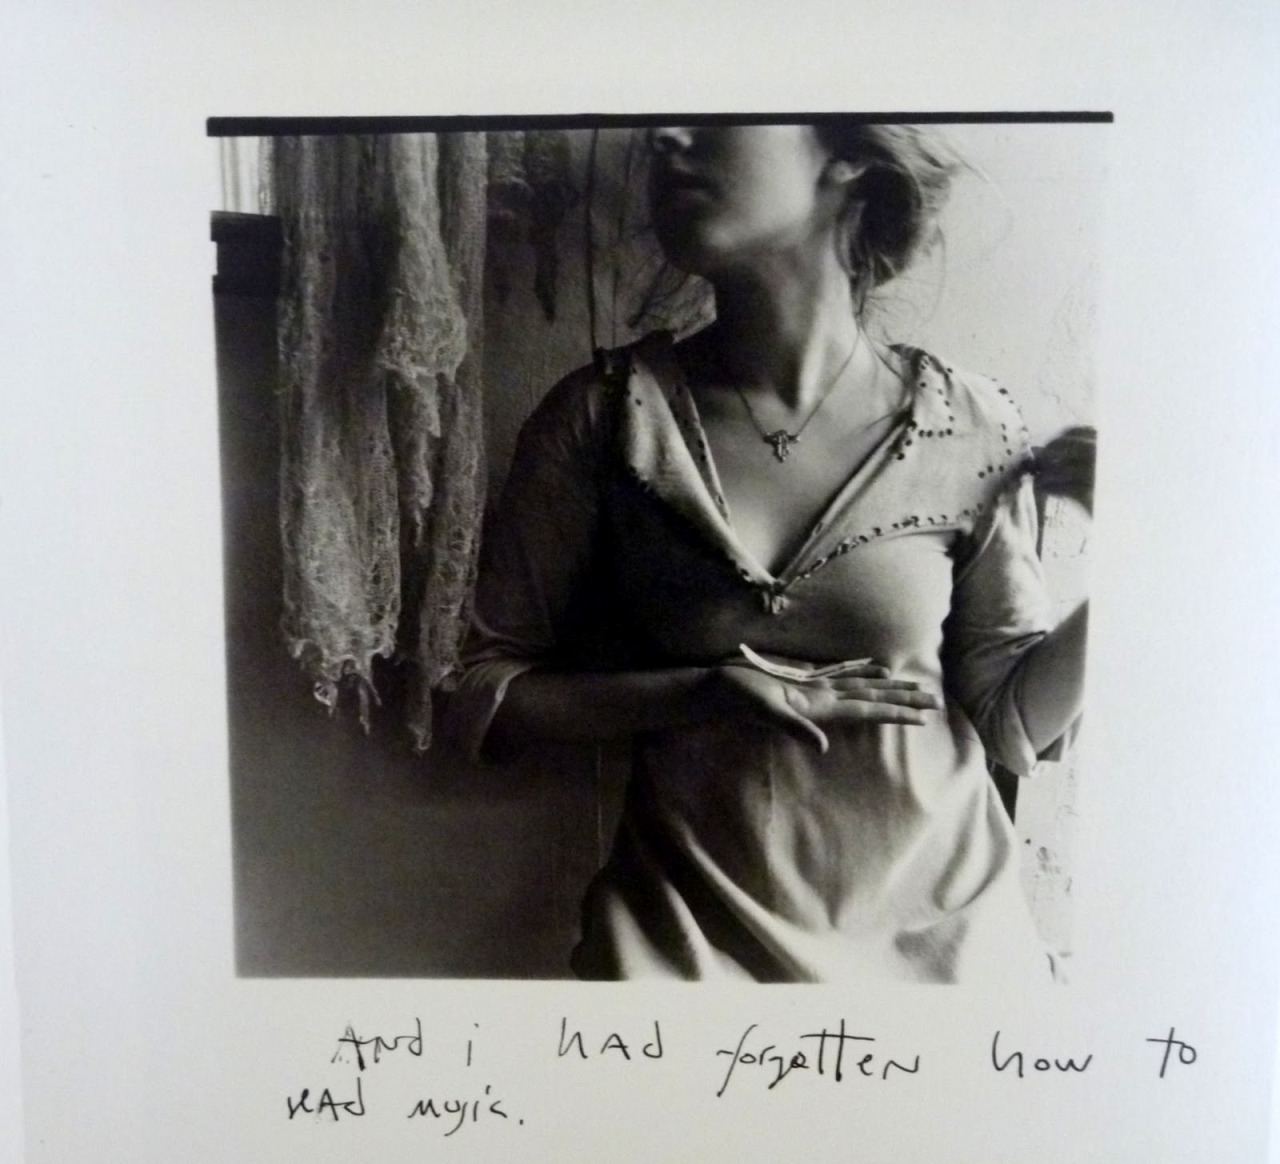 Francesca Woodman 1976 And I had forgotten how to Read Music.